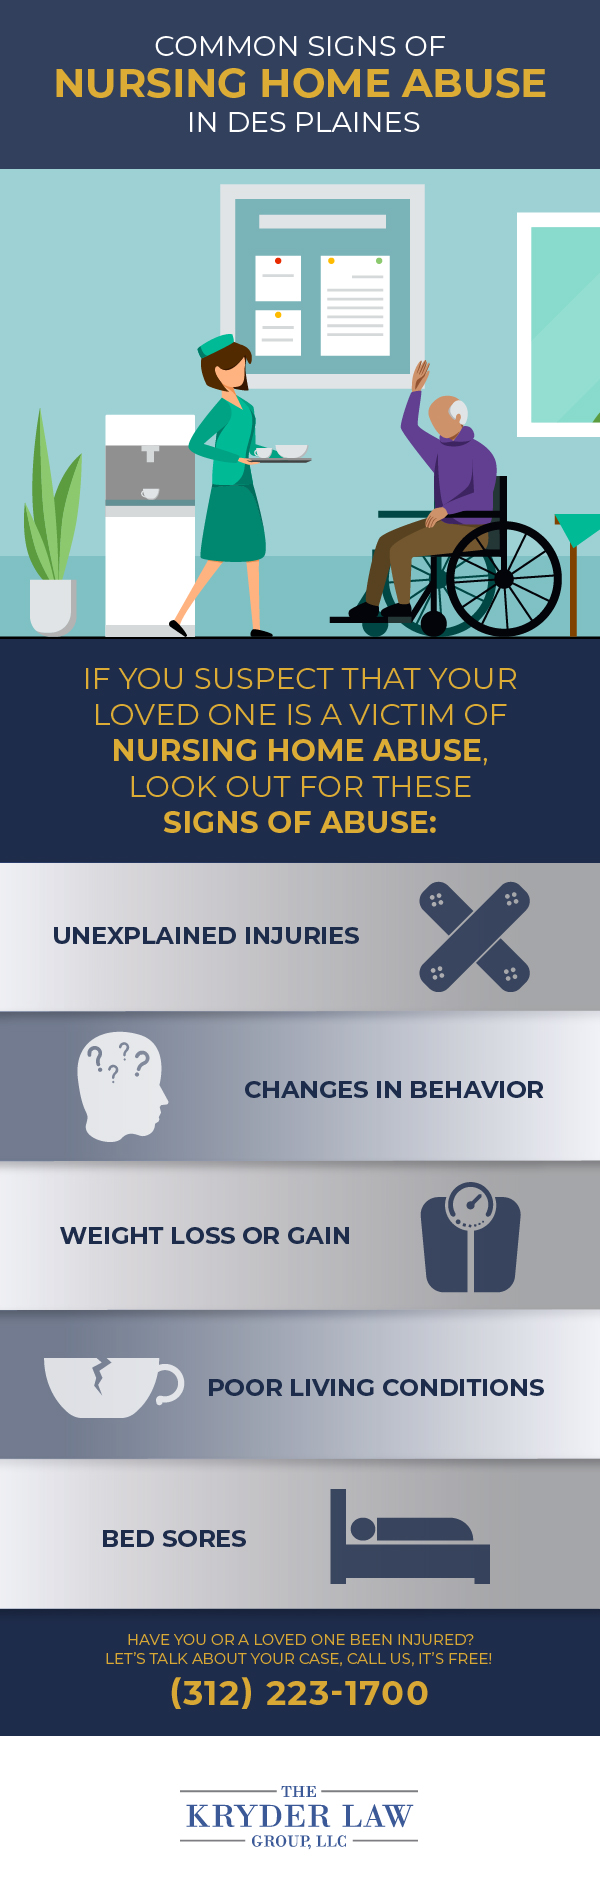 Common Signs of Nursing Home Abuse in Des Plaines